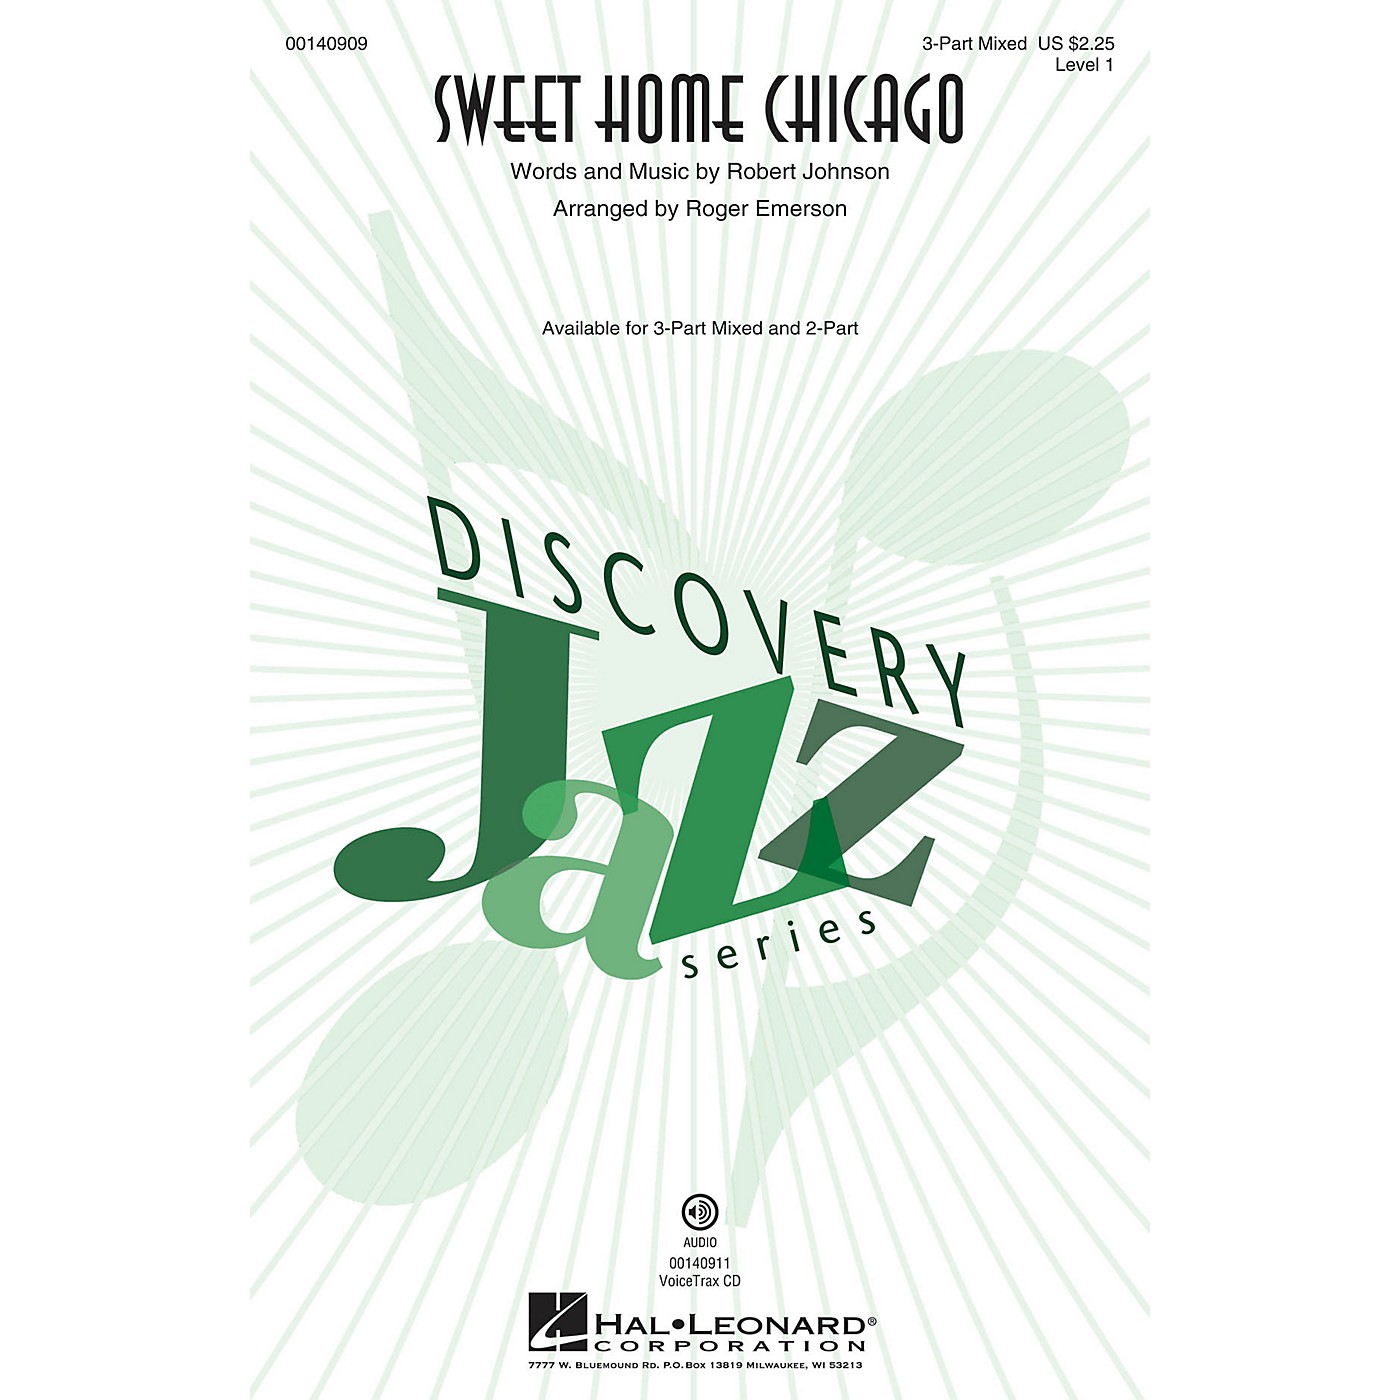 Hal Leonard Sweet Home Chicago (Discovery Level 1) 3-Part Mixed arranged by Roger Emerson thumbnail